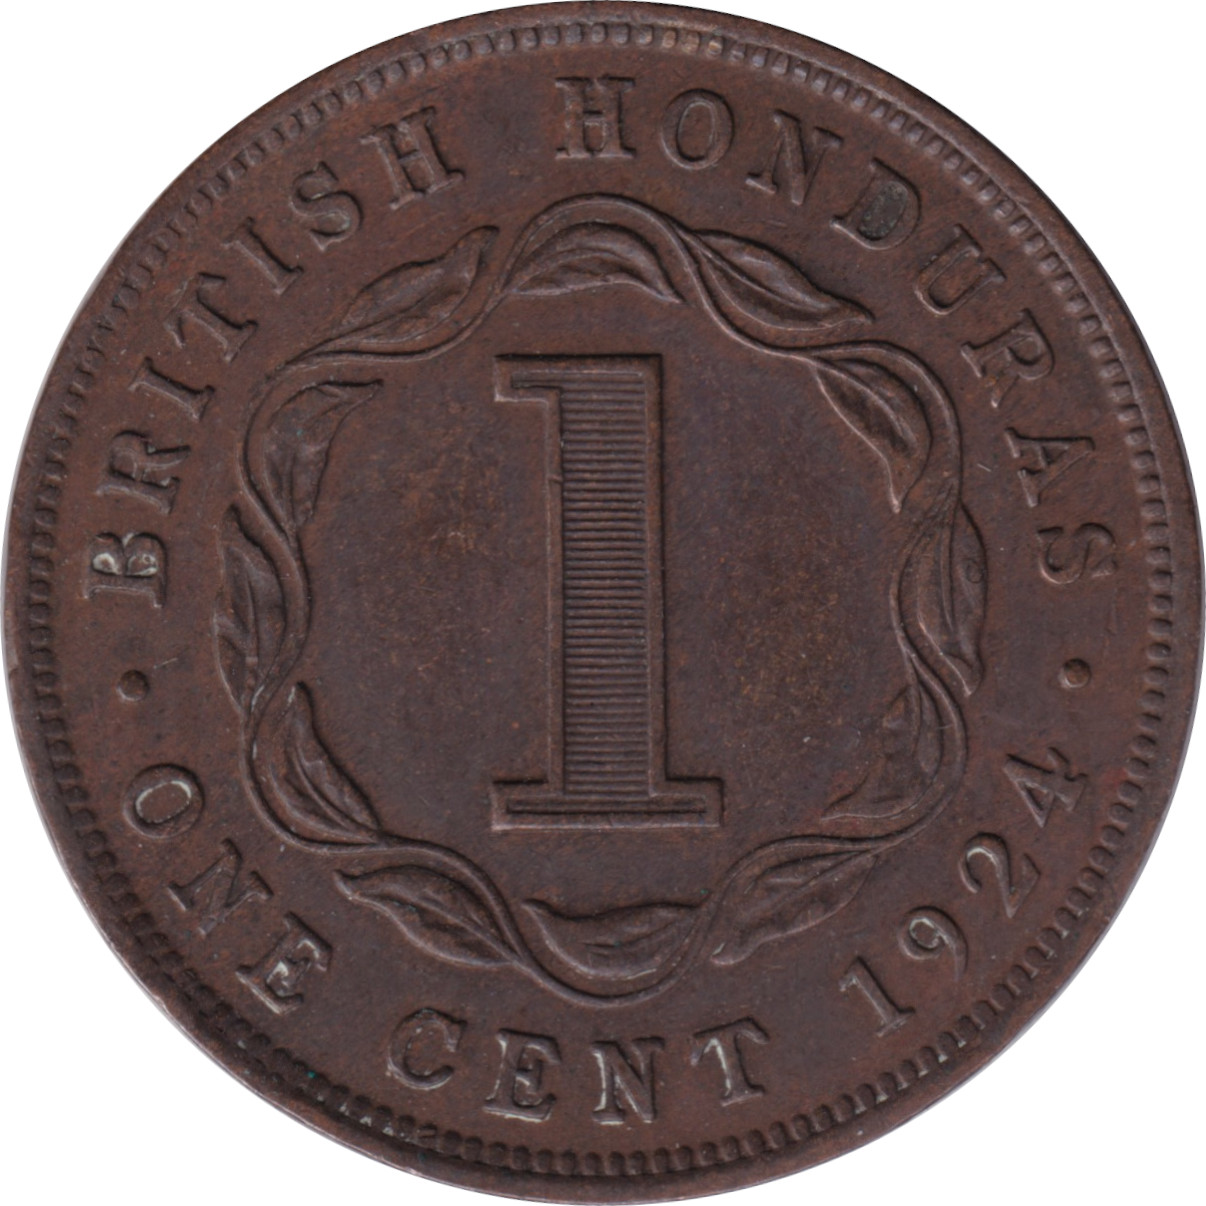 1 cent - George V - Rameaux centraux